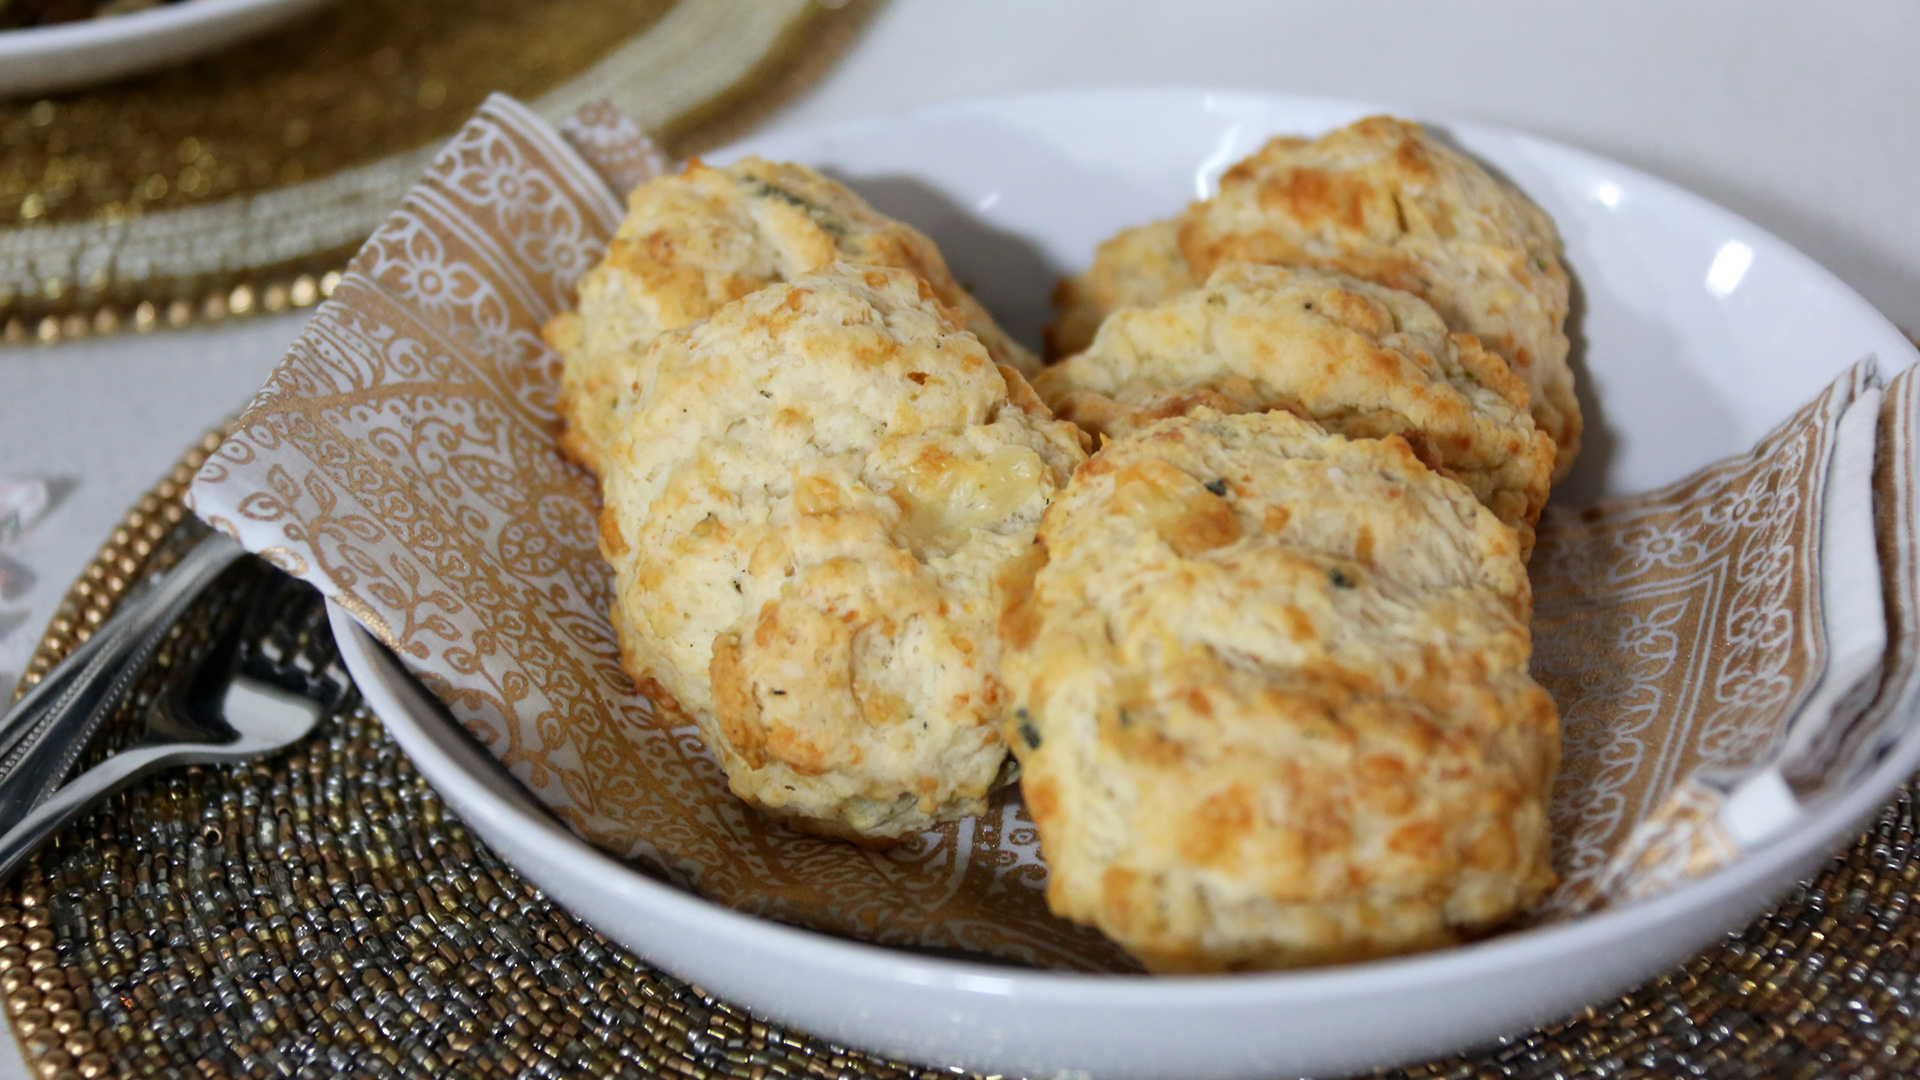 Cheddar sage biscuits with honey butter